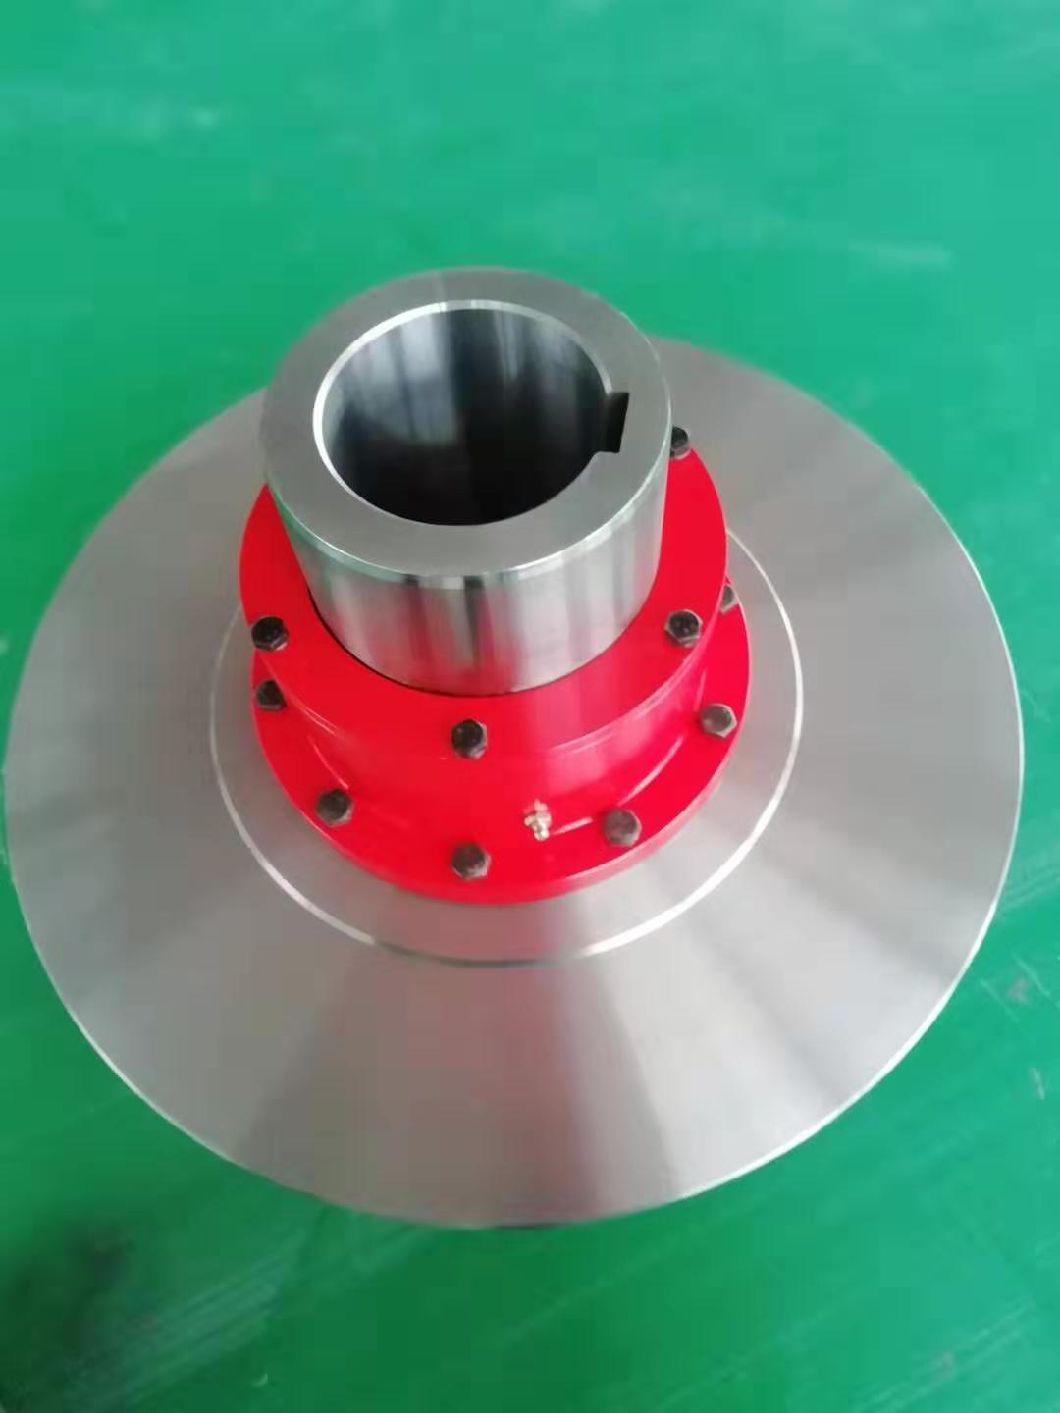 Drum Gear Coupling with Brake Disc